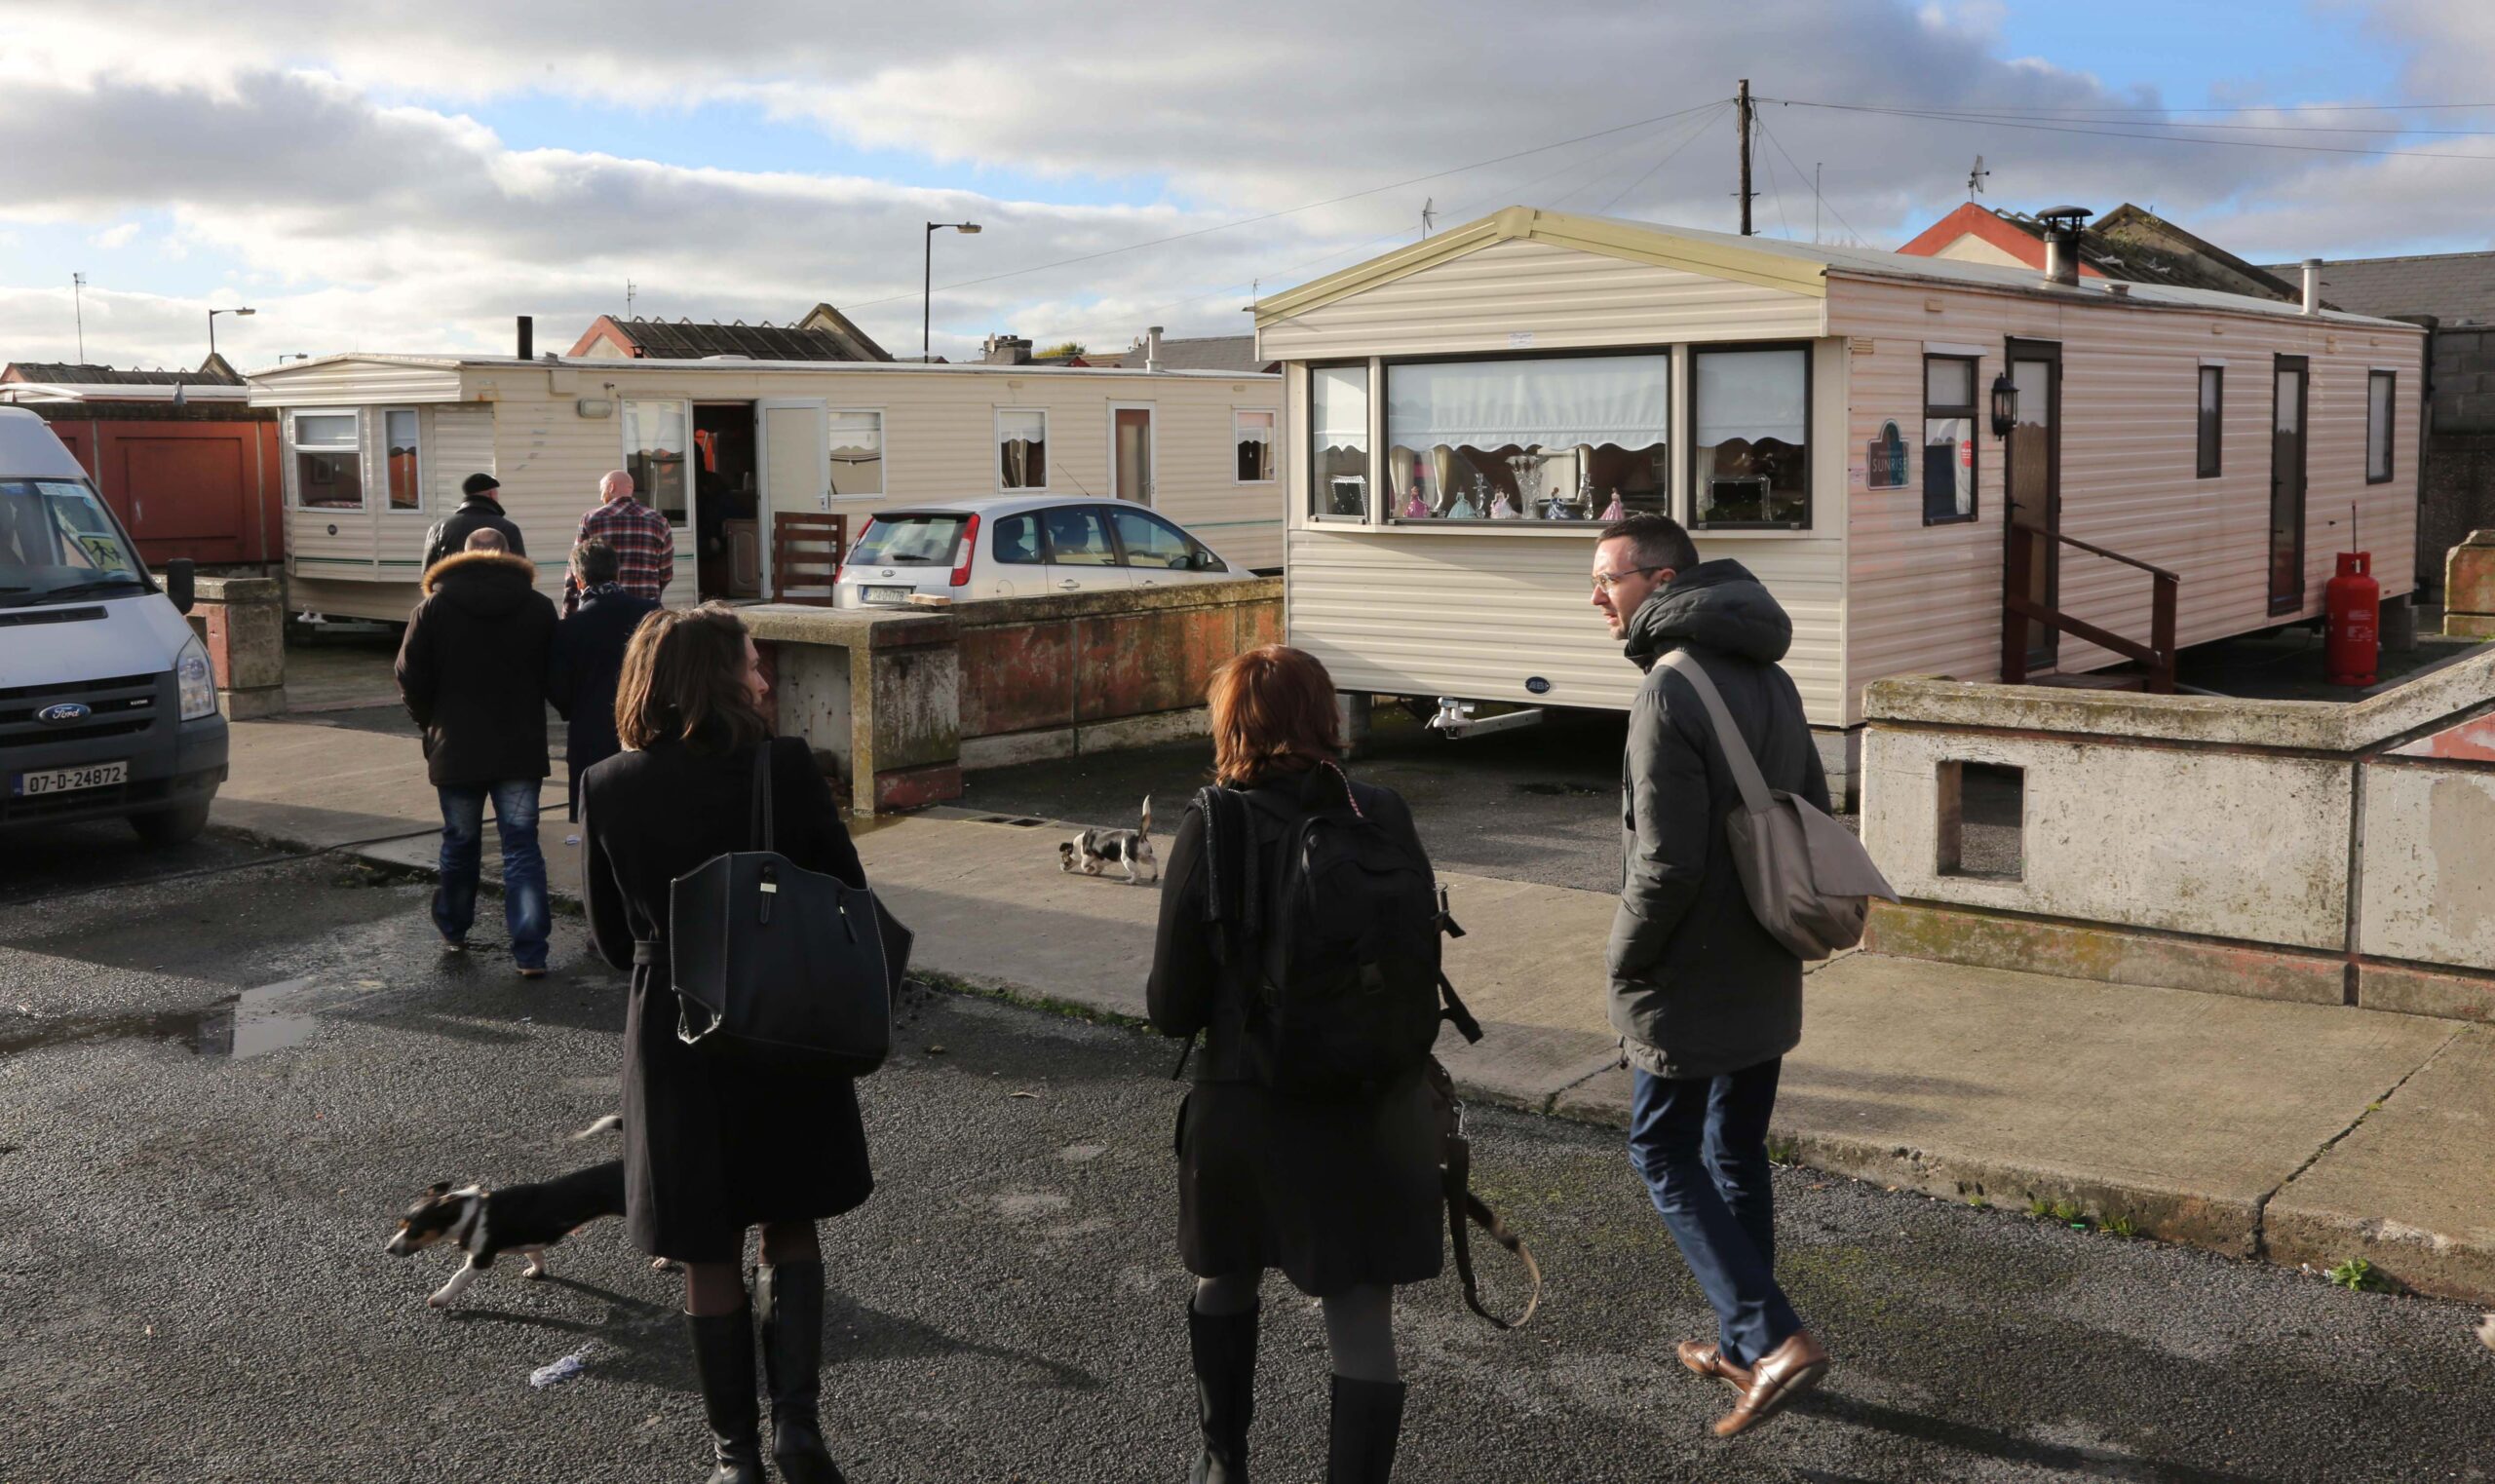 IHREC urges local authorities to do better when it comes to Traveller accommodation